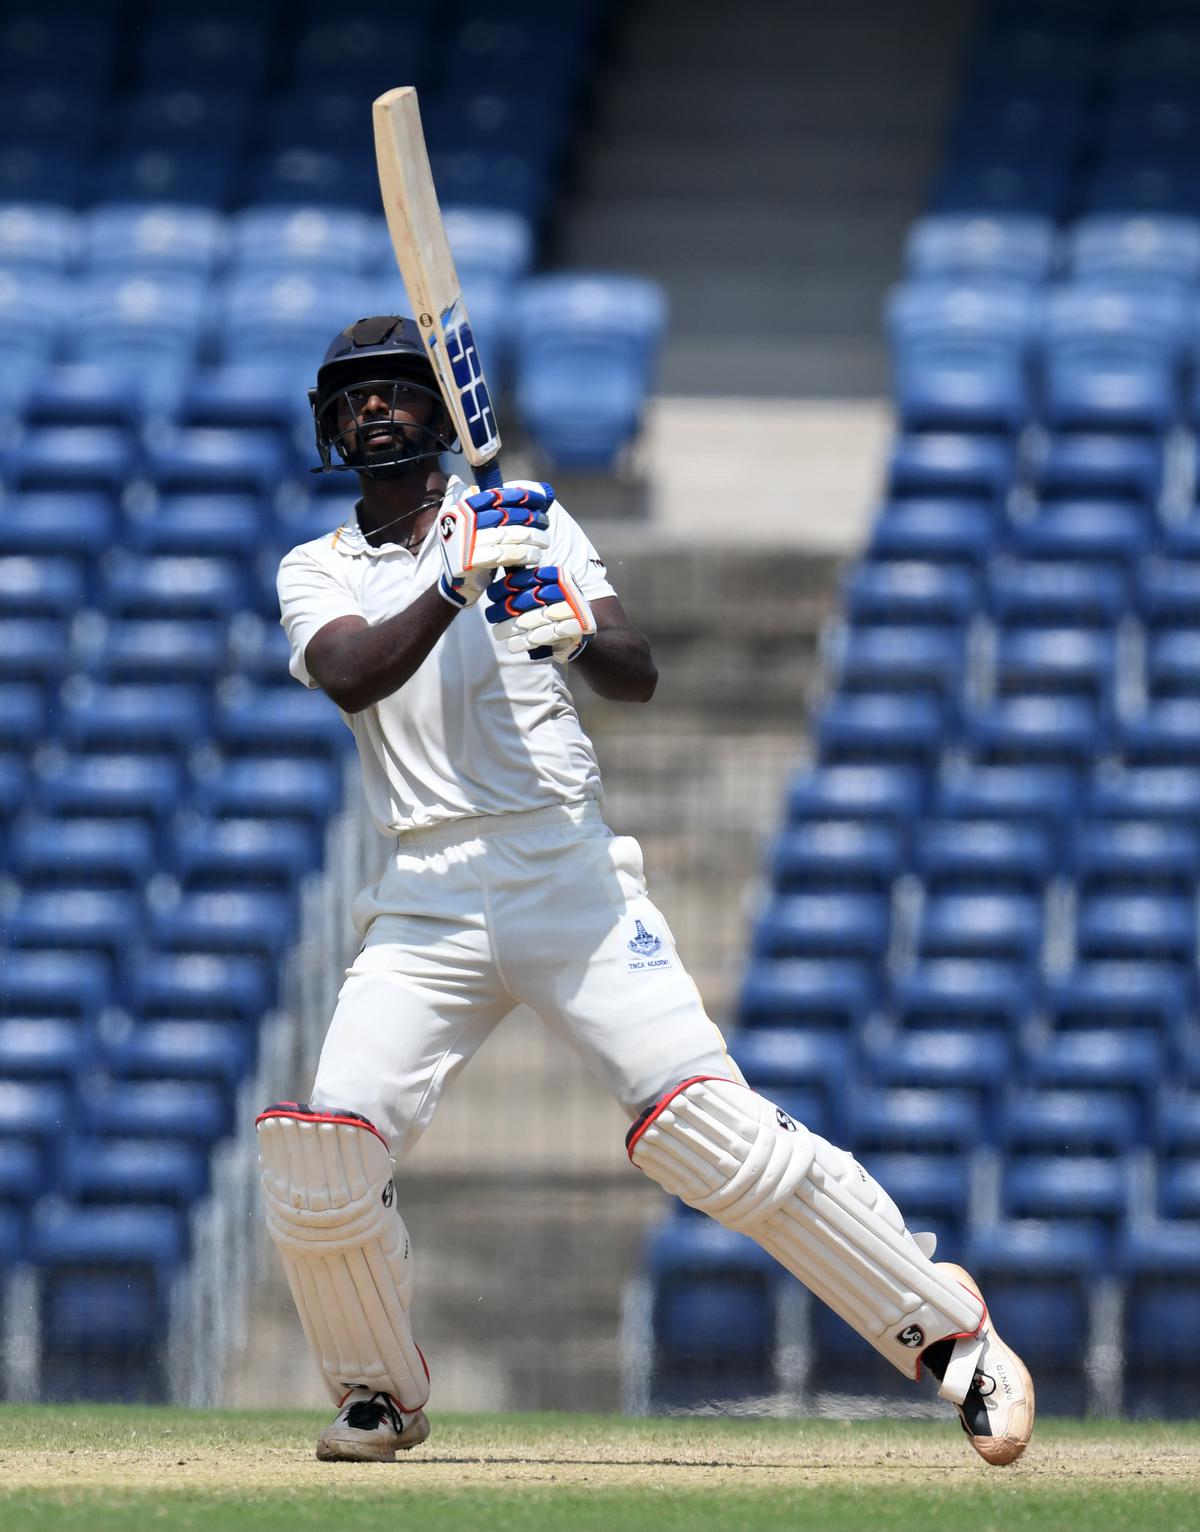 Tamil Nadu batter Aswin Crist in action against Bangladesh XI on the fourth day of the Test match at the MA Chidambaram Stadium, Chepauk, in Chennai on Friday. 